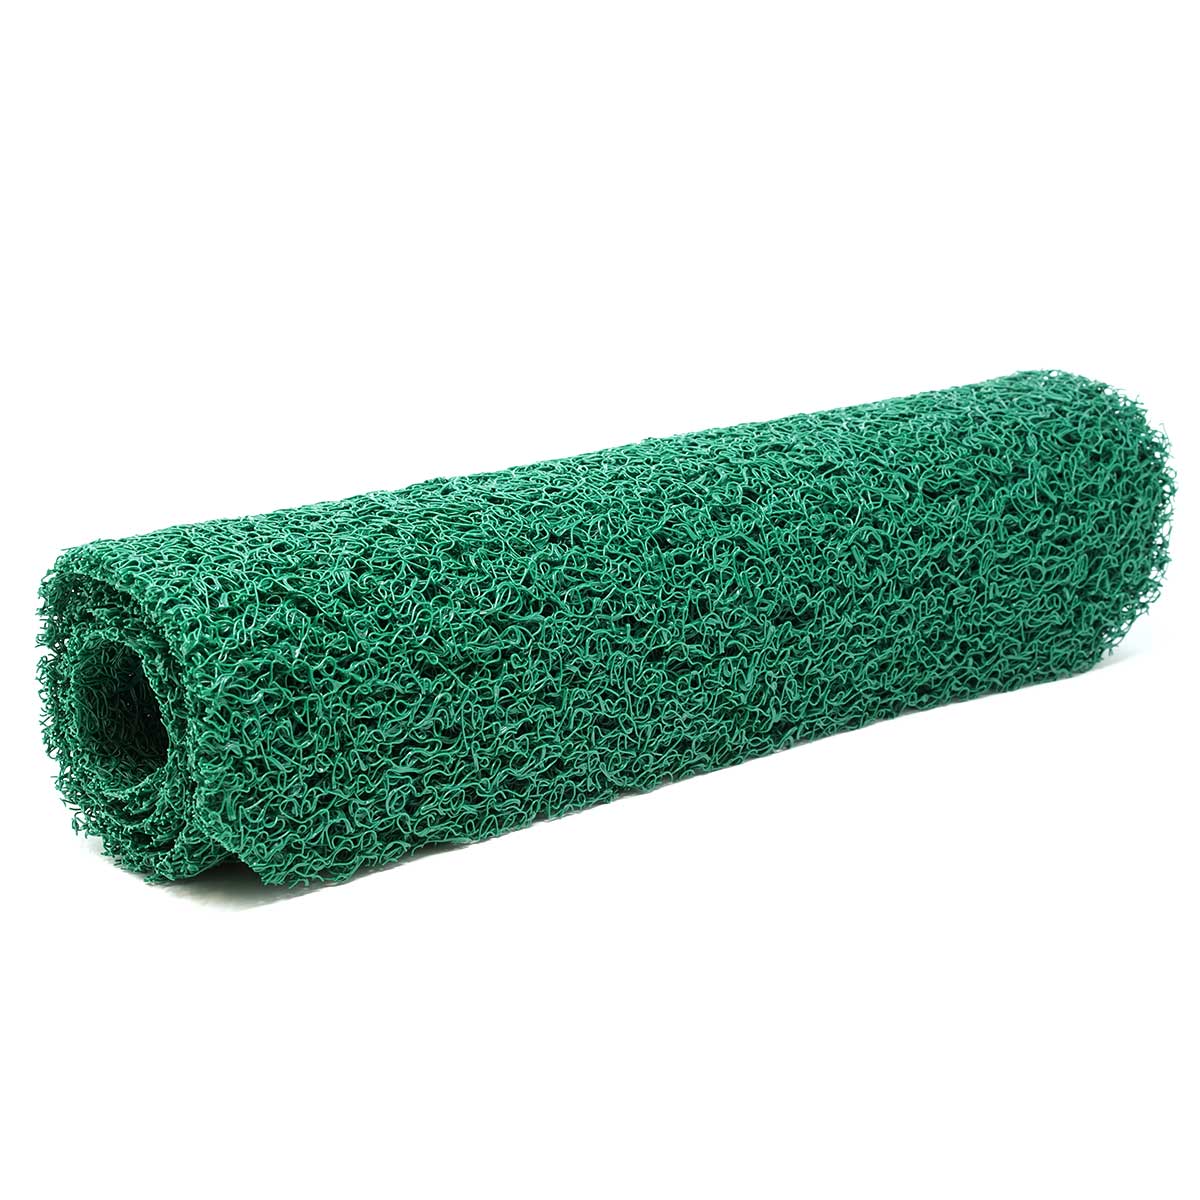 PetSafe Replacement Turf for Piddle Place Pet Potty